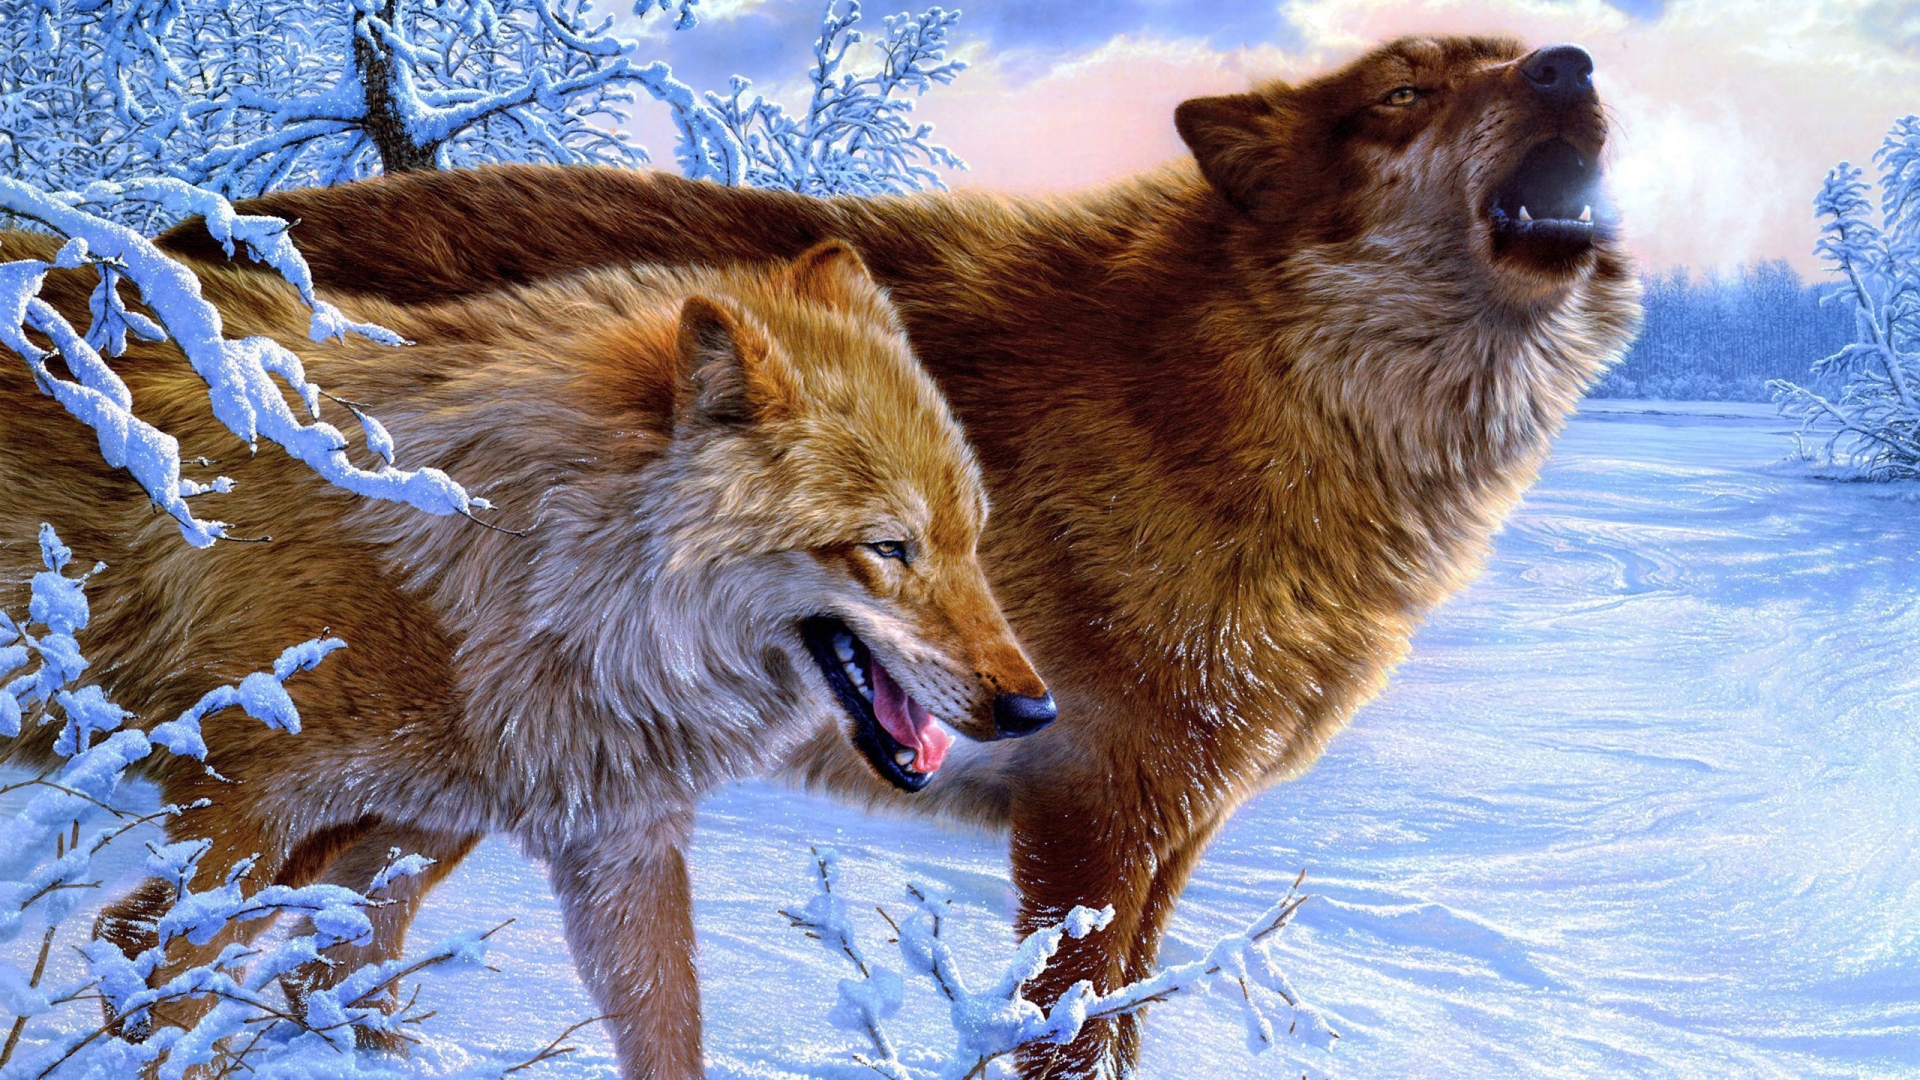 Amazing Wolves for 1920 x 1080 HDTV 1080p resolution